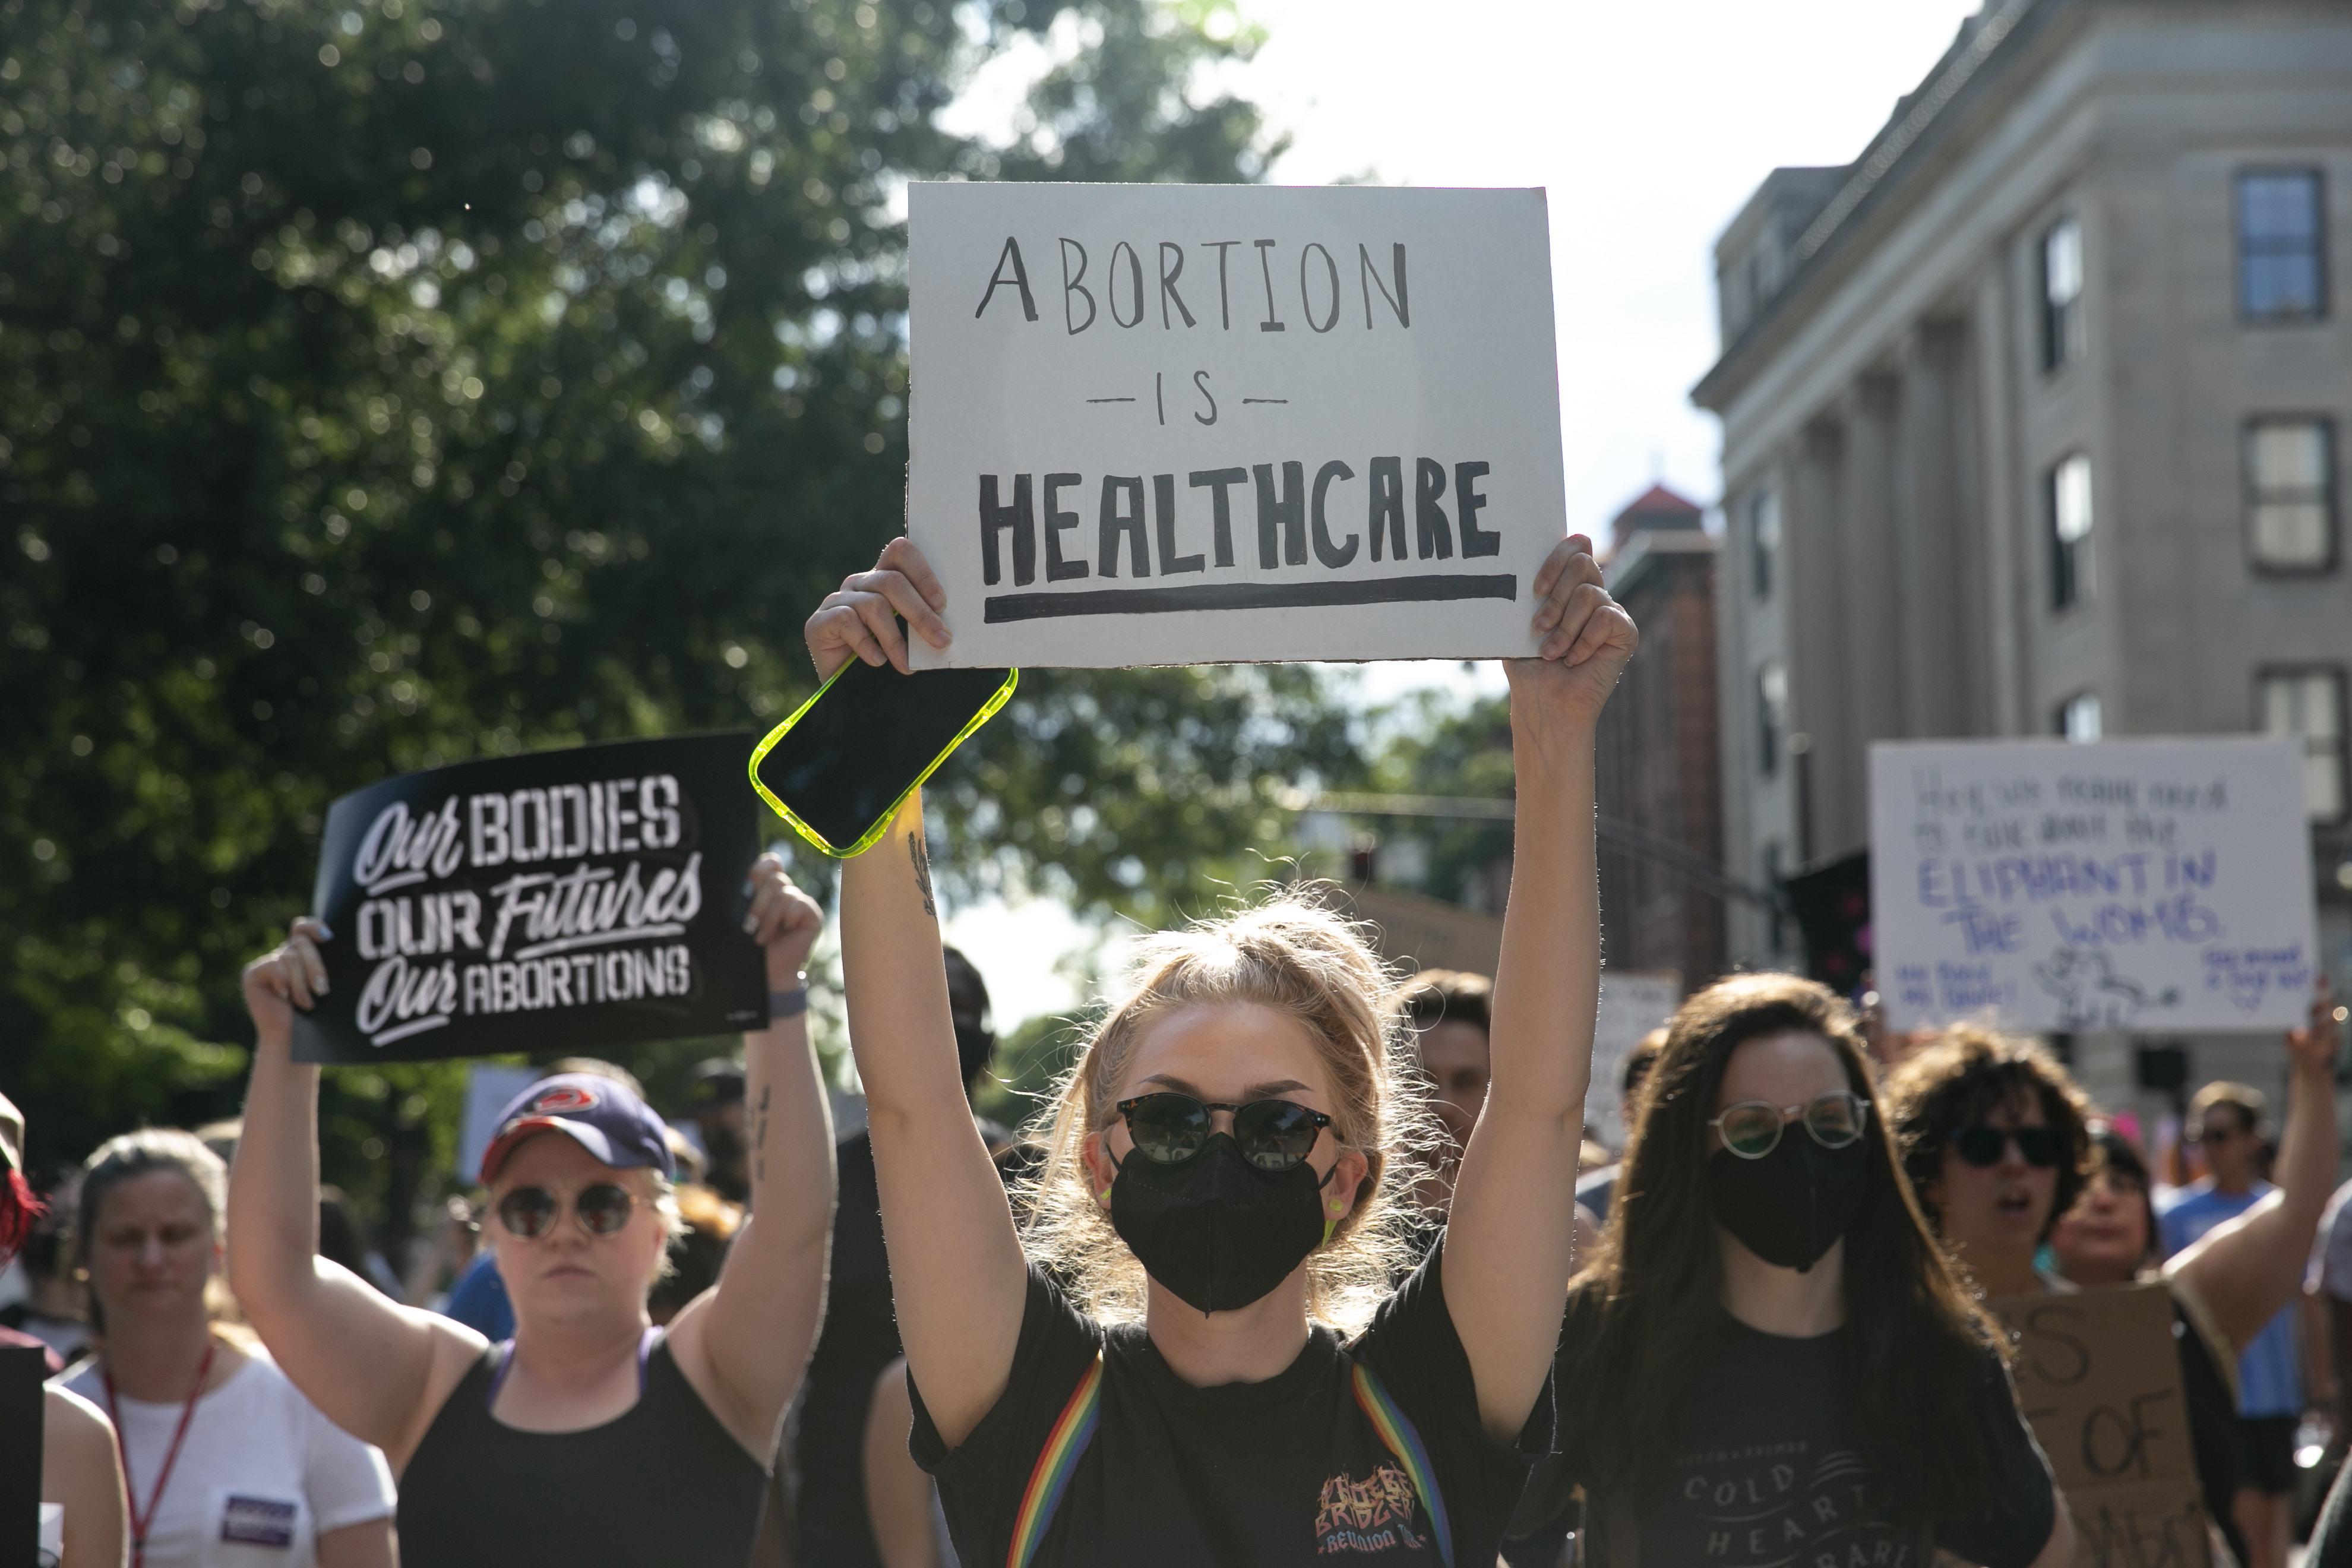 Protesters holding up signs saying "Abortion is Healthcare" and "Our Bodies, Our Futures, Our Abortions."